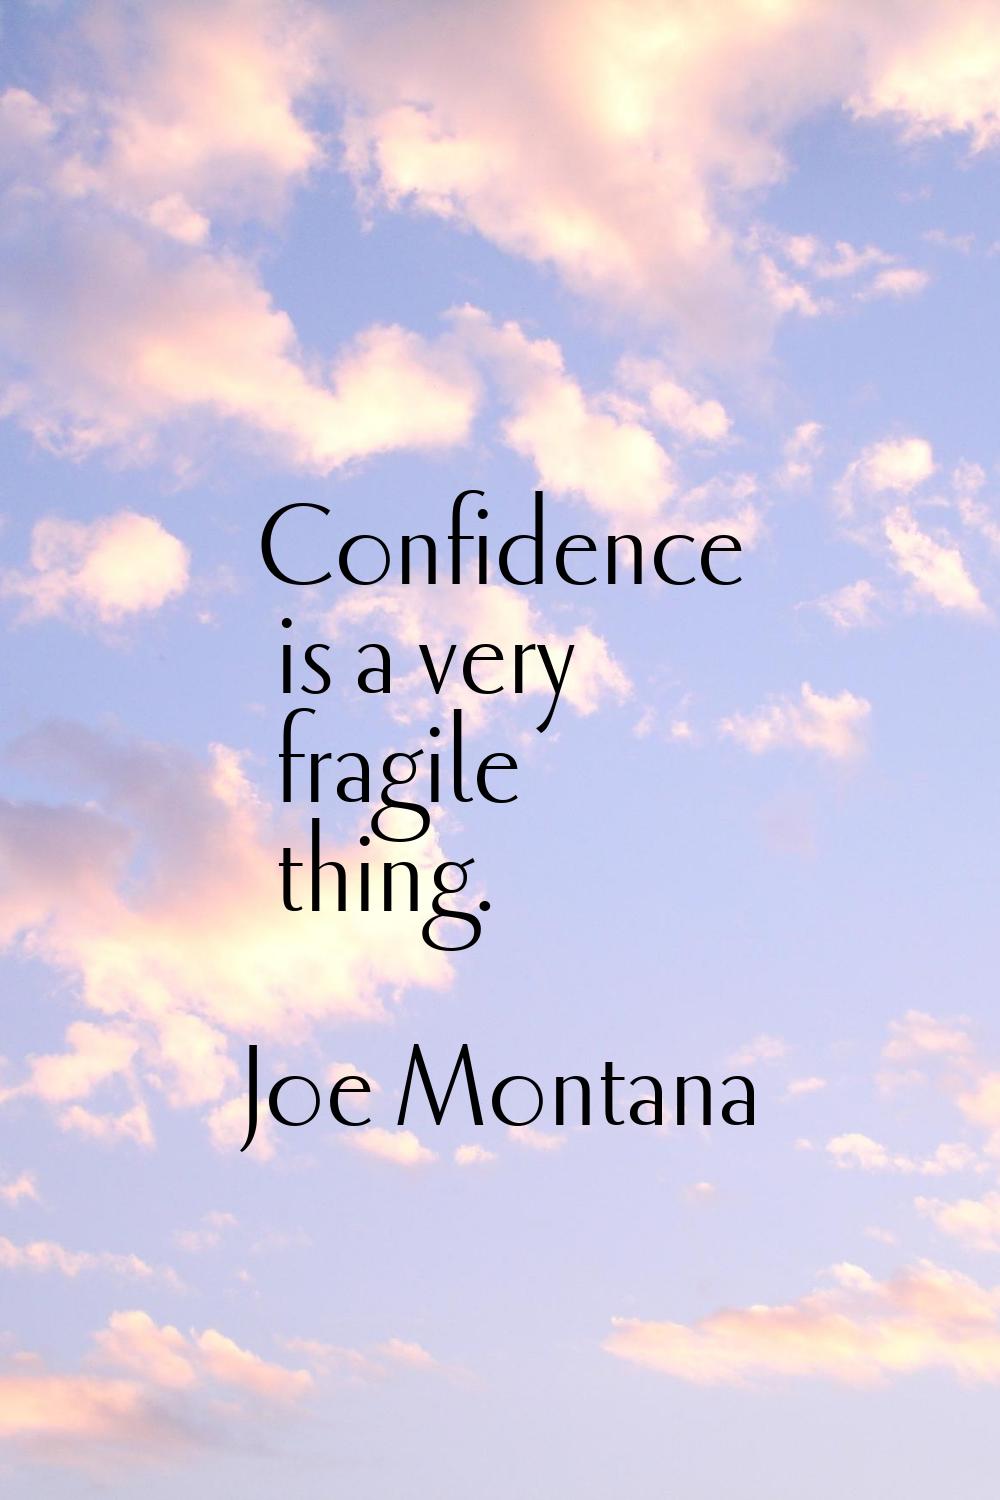 Confidence is a very fragile thing.